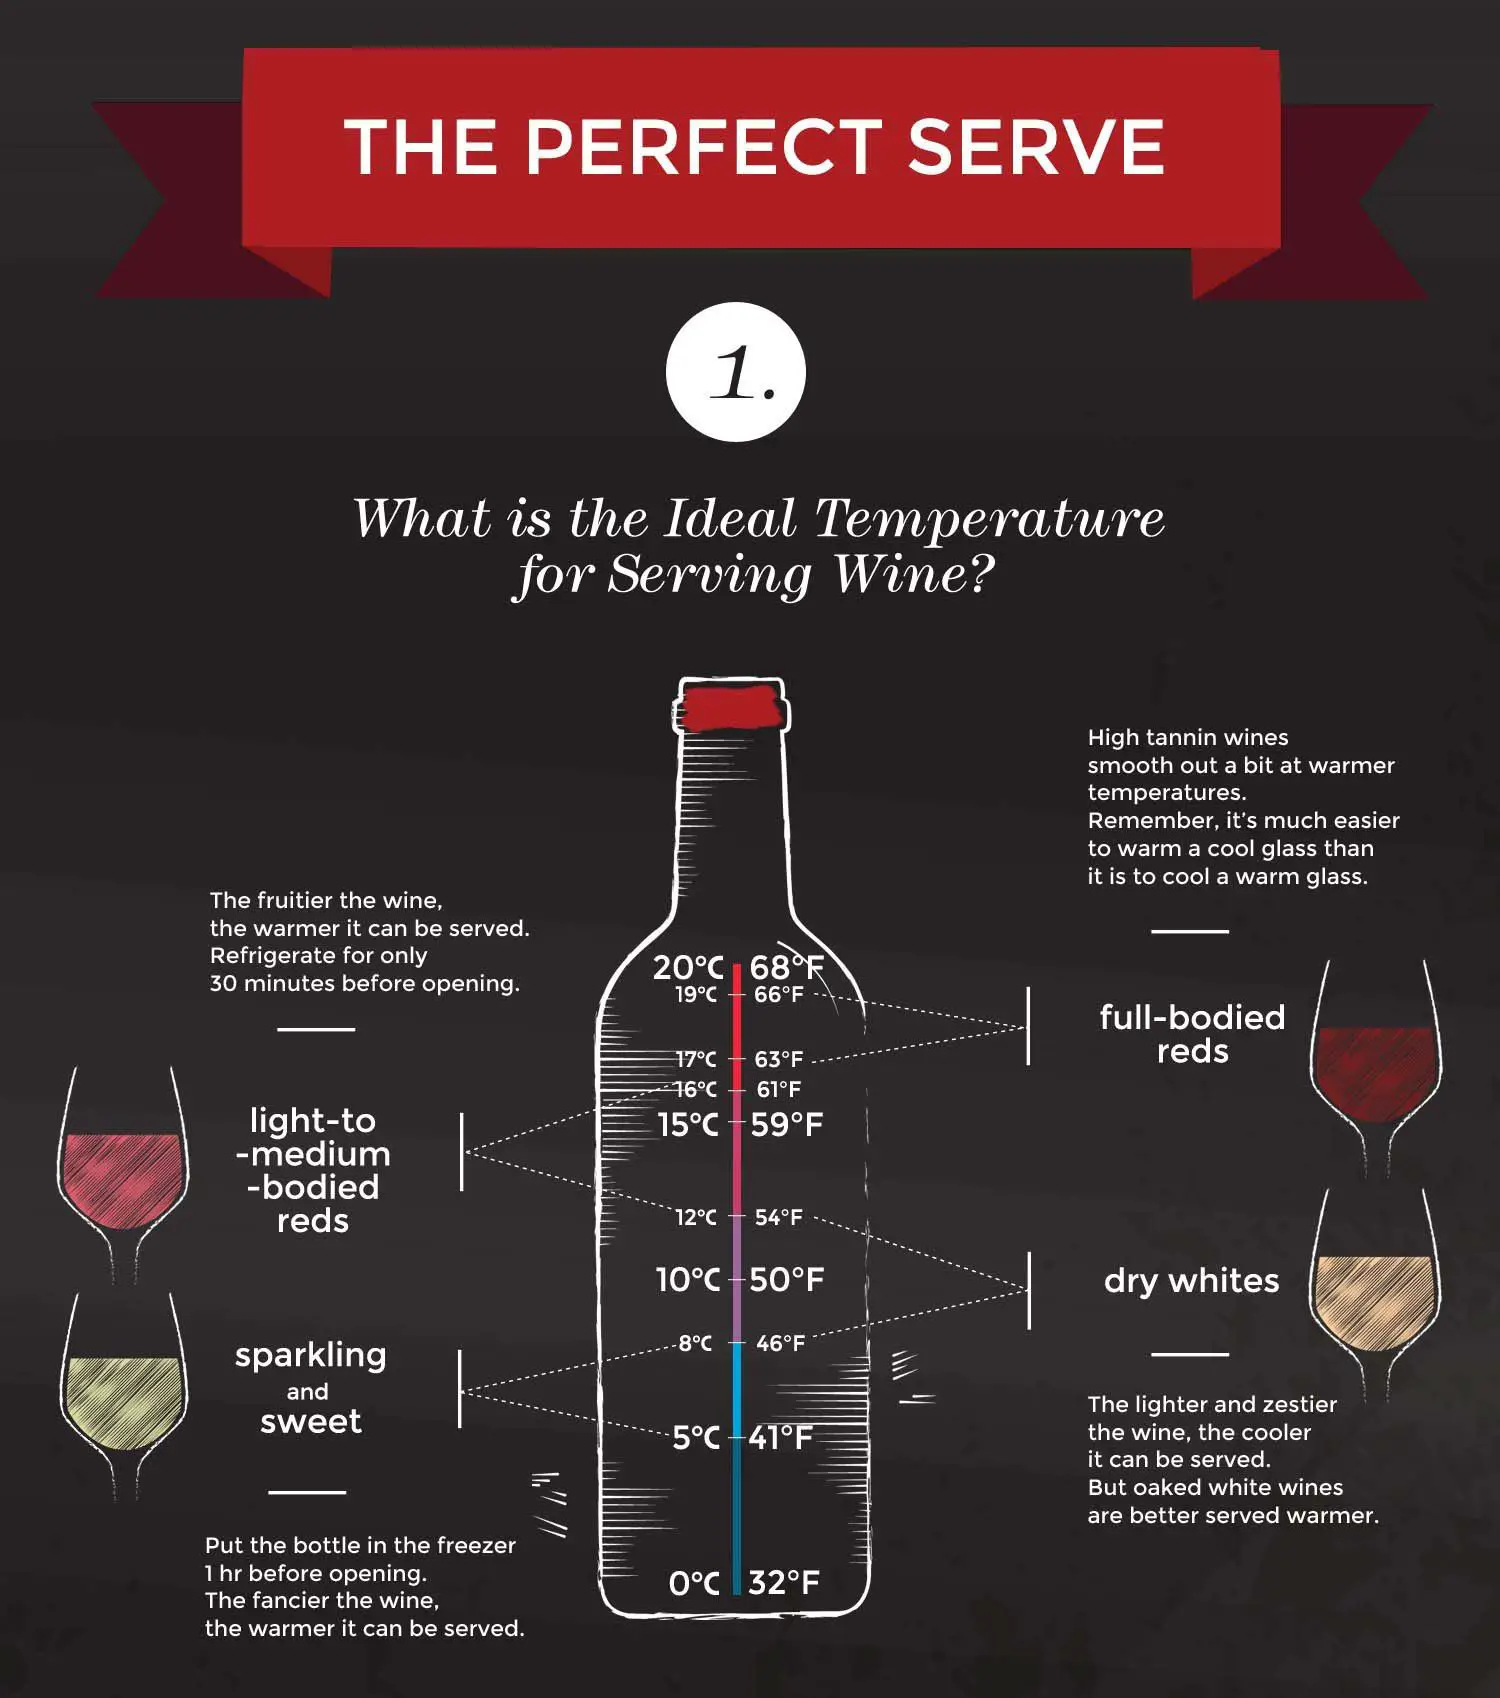 Wine Drinkerâs Guide: Temperatures for Serving [Infographic]